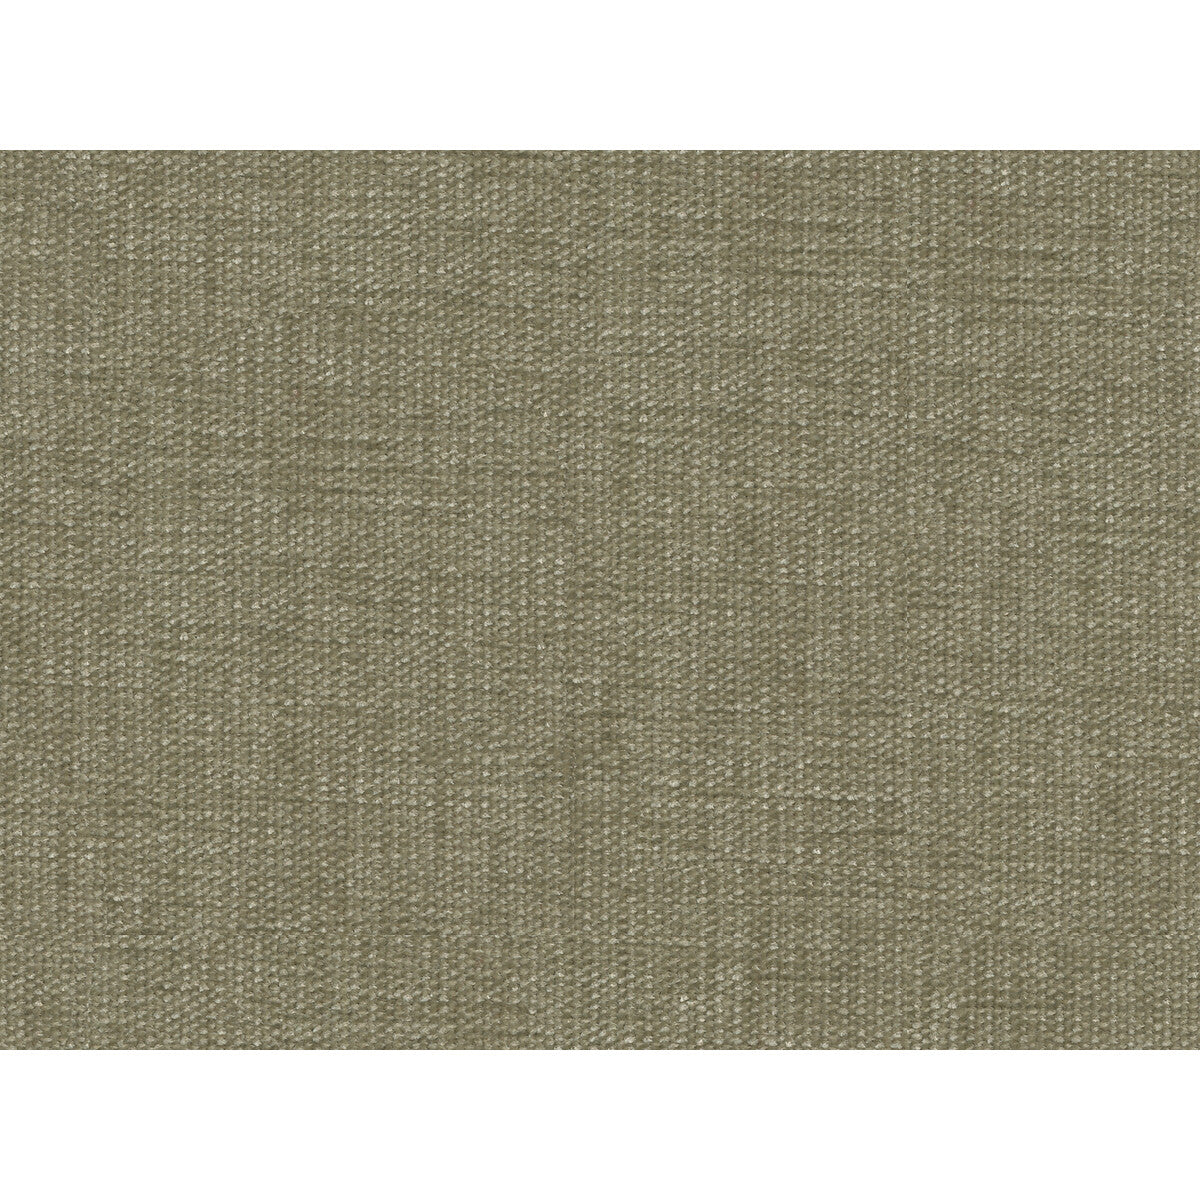 Kravet Contract fabric in 34961-161 color - pattern 34961.161.0 - by Kravet Contract in the Performance Kravetarmor collection